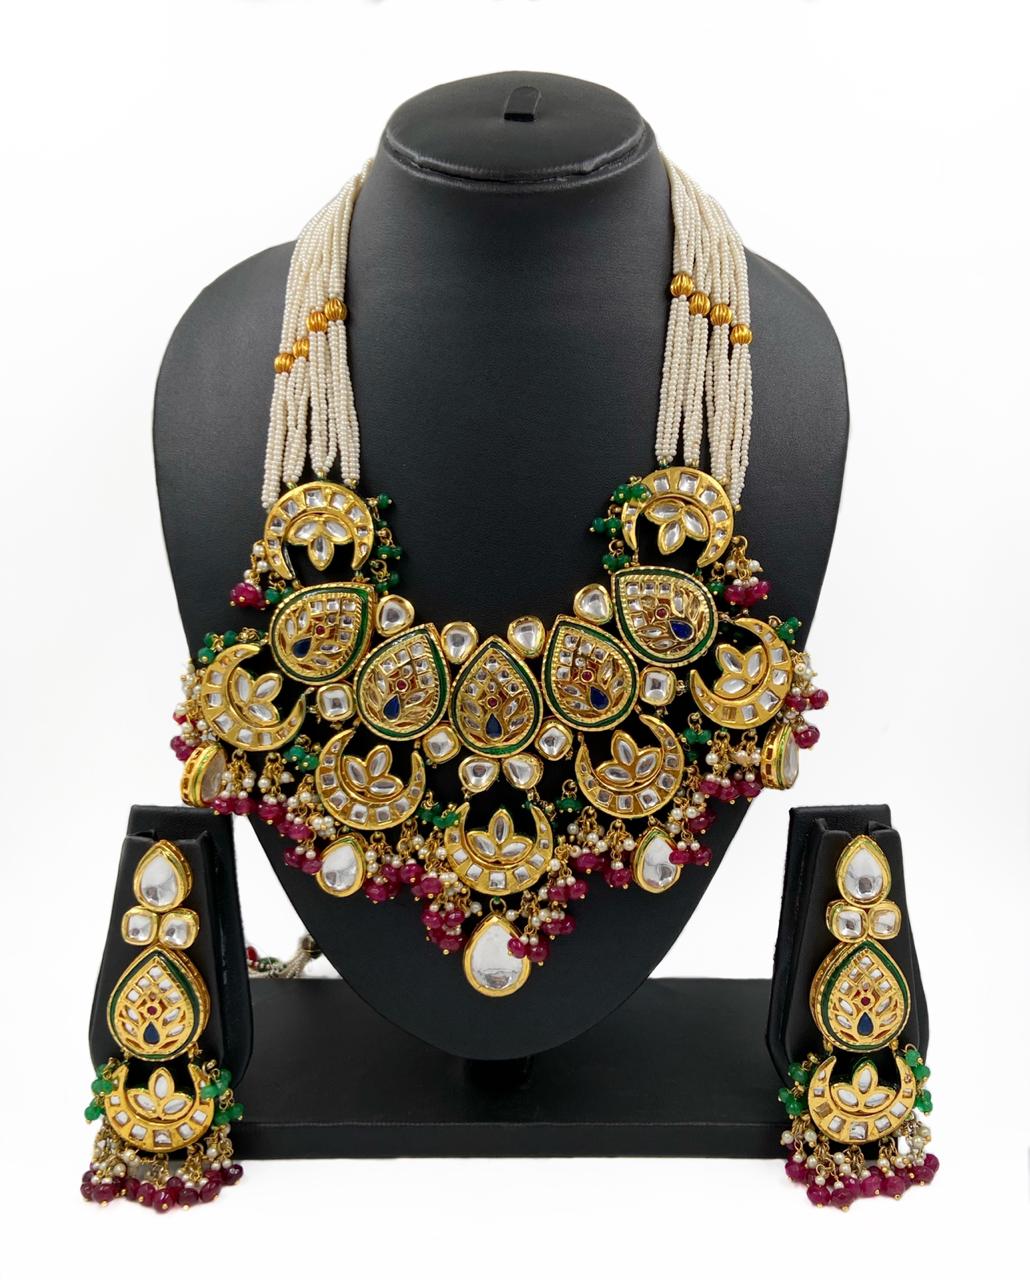 Designer Kundan And Pearls Necklace For Women By Gehna Shop Meenakari Necklace Sets